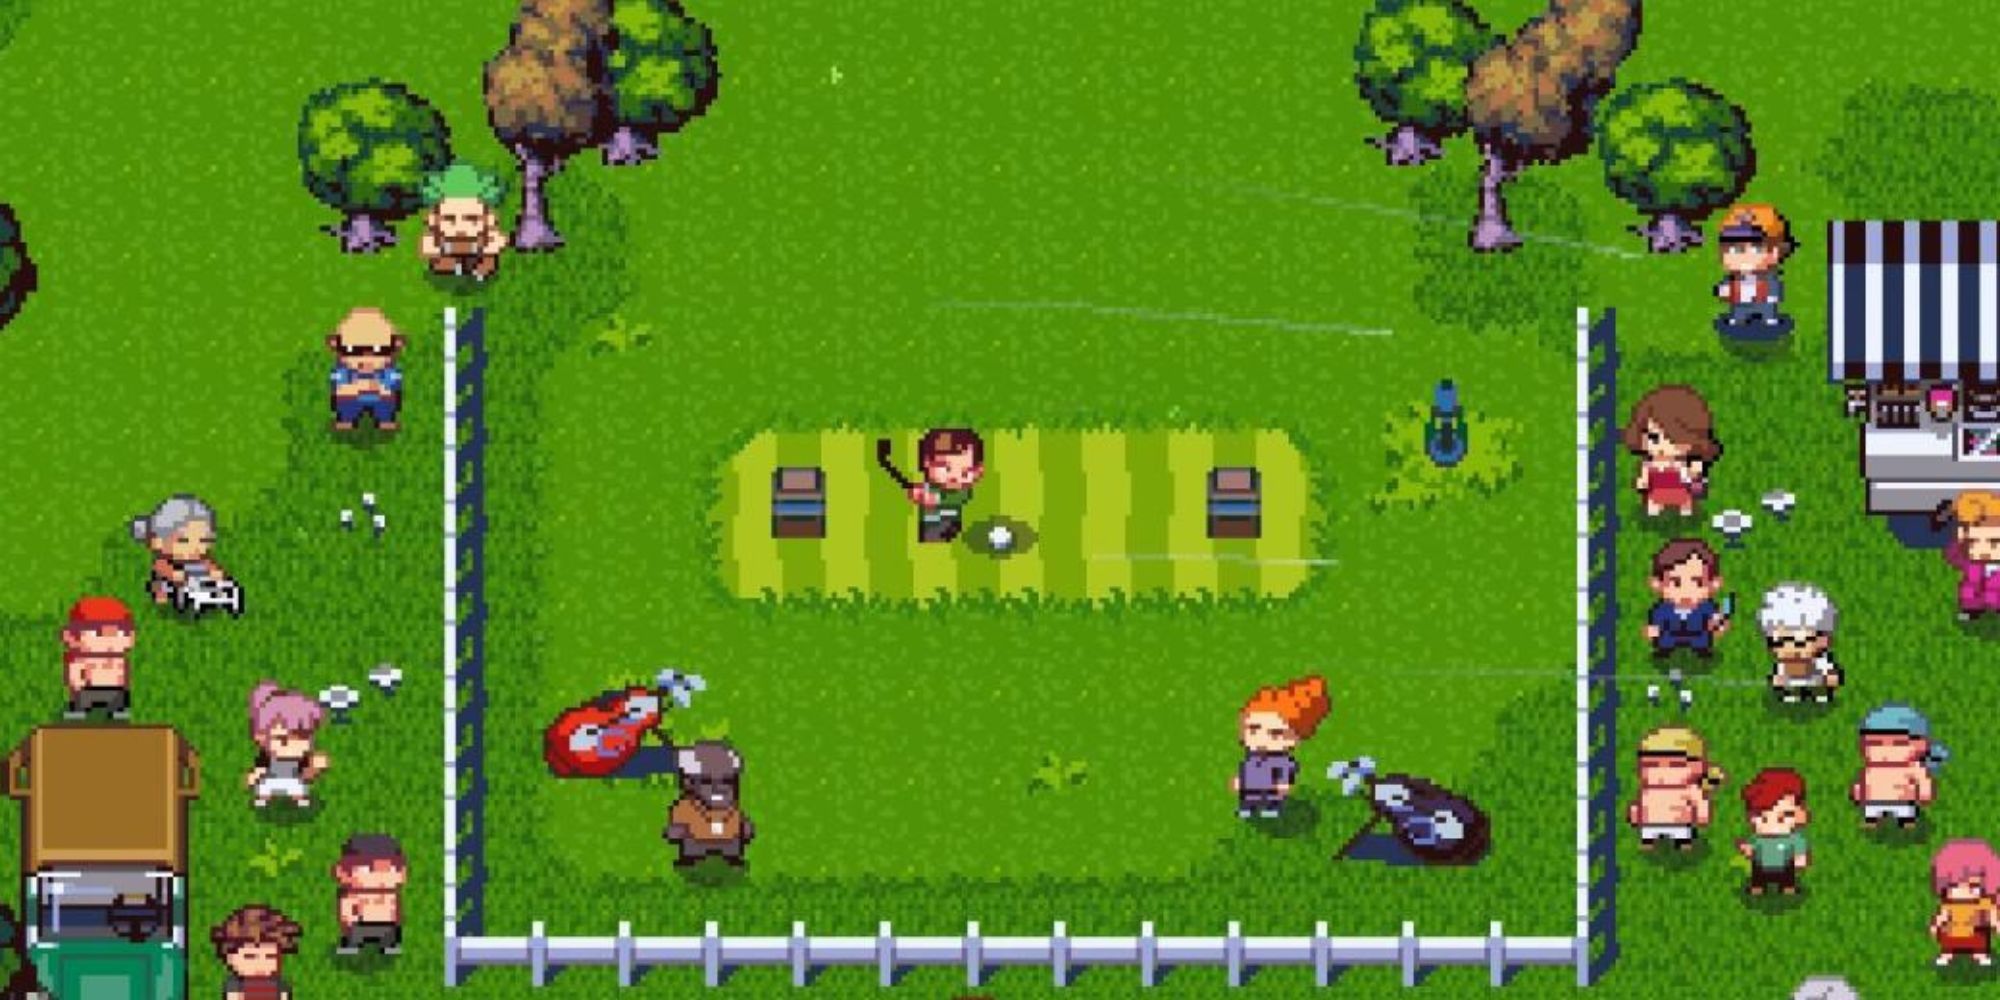 A character prepares to golf surrounded by spectators